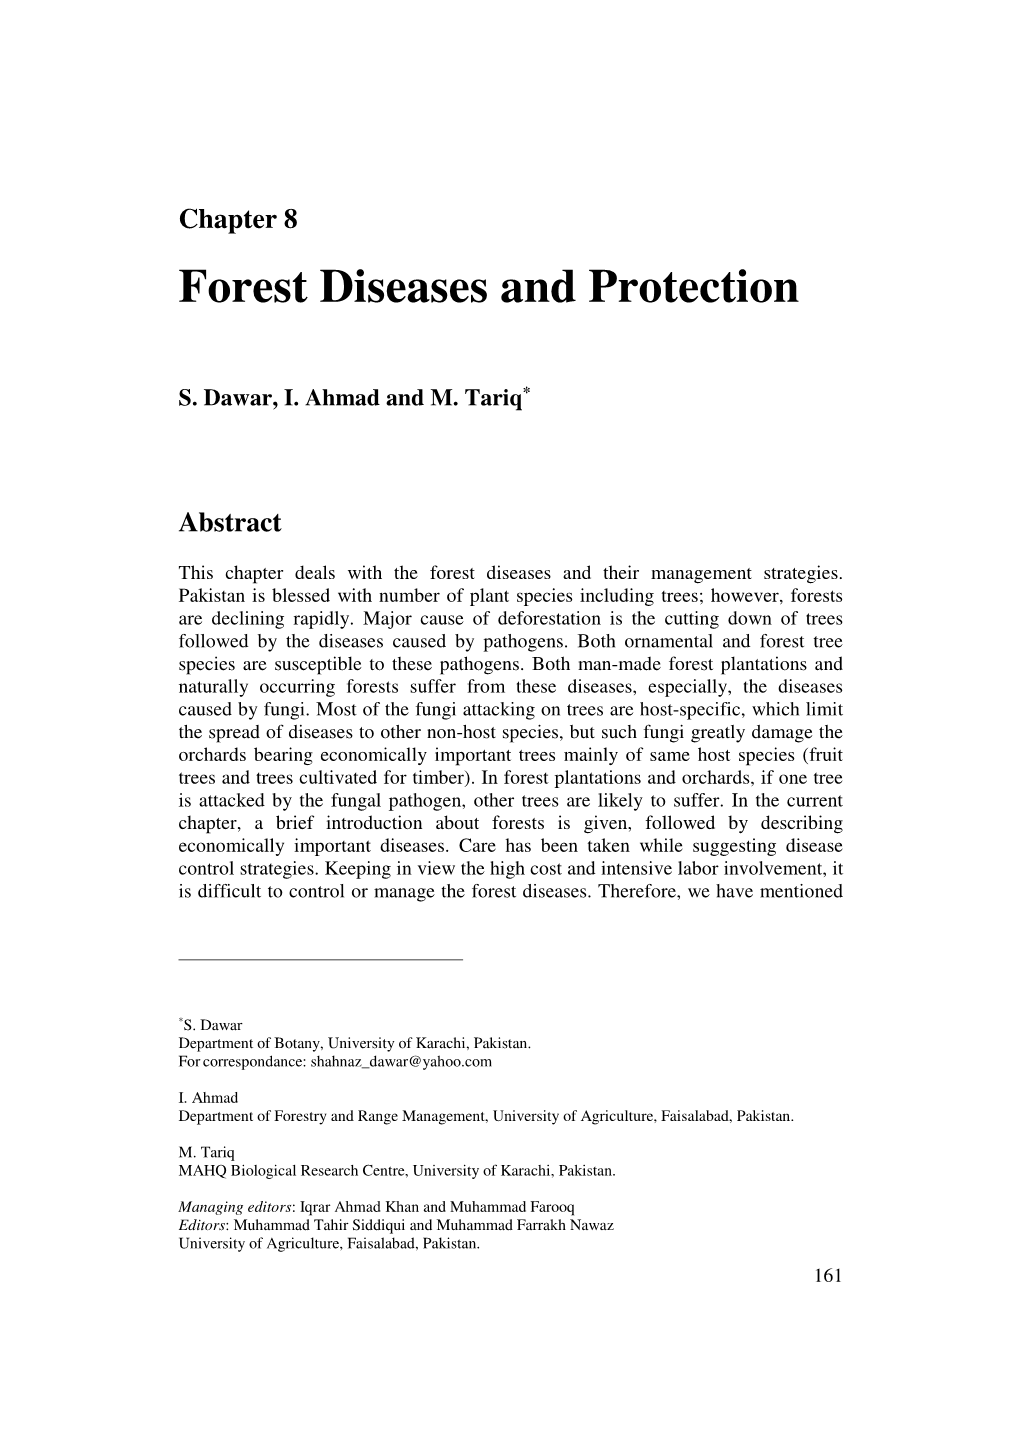 Forest Diseases and Protection